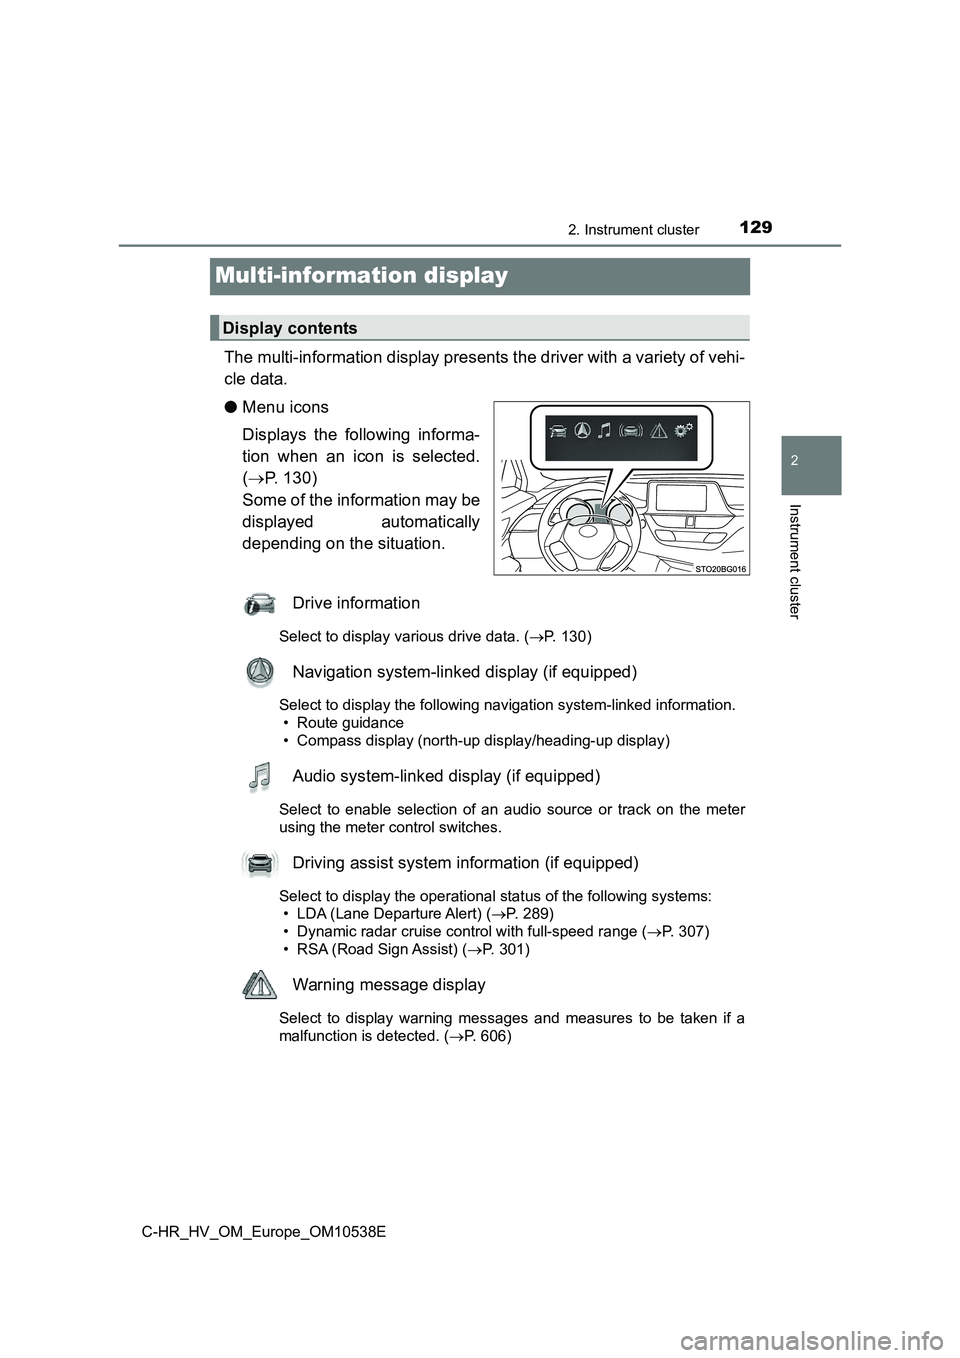 TOYOTA C_HR HYBRID 2017  Owners Manual 129
2
2. Instrument cluster
Instrument cluster
C-HR_HV_OM_Europe_OM10538E
Multi-information display
The multi-information display presents the driver with a variety of vehi- 
cle data. 
● Menu icons